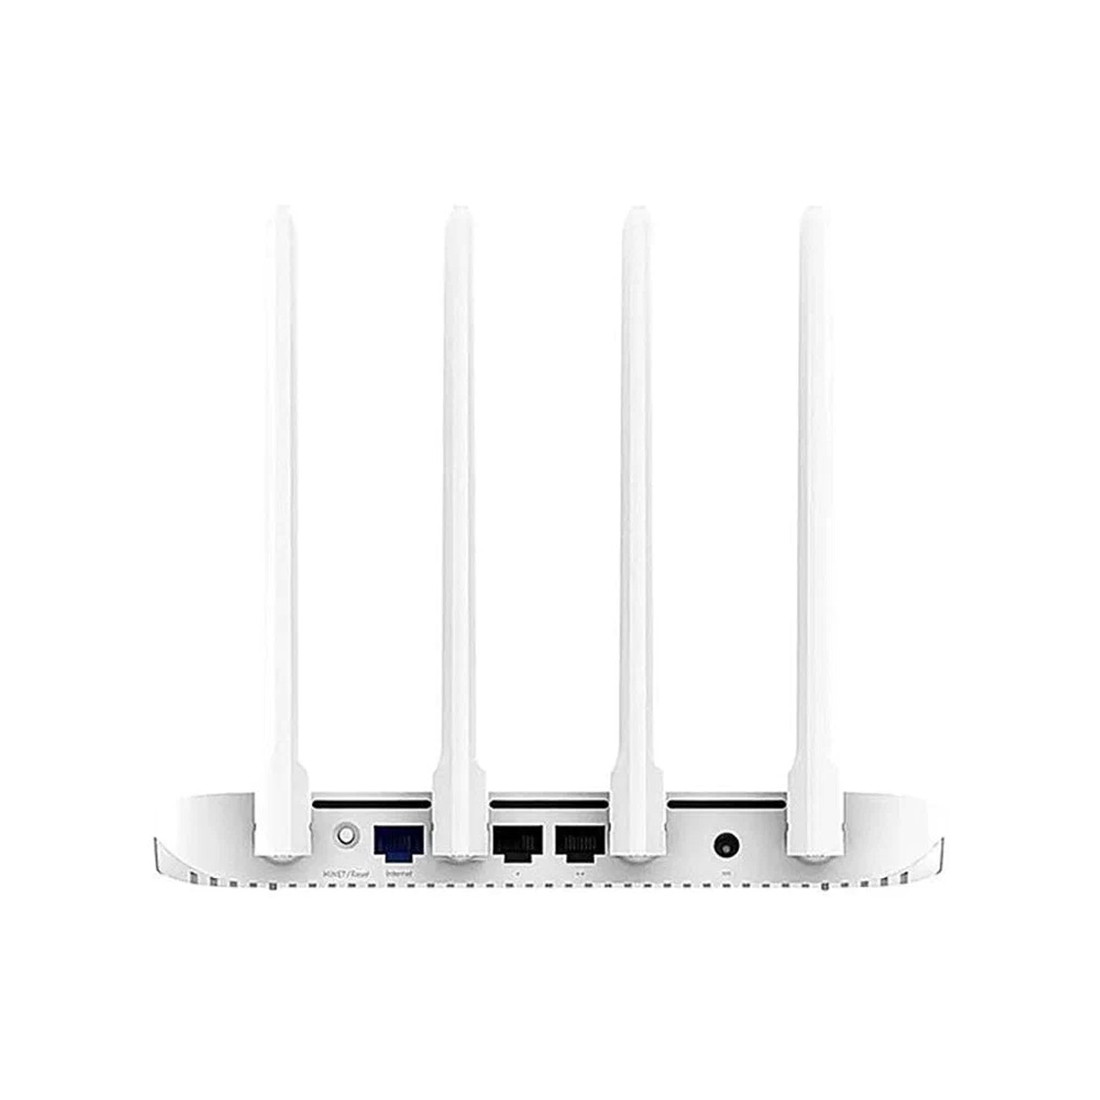 Маршрутизатор Xiaomi Router AC1200 - фото 3 - id-p112890006